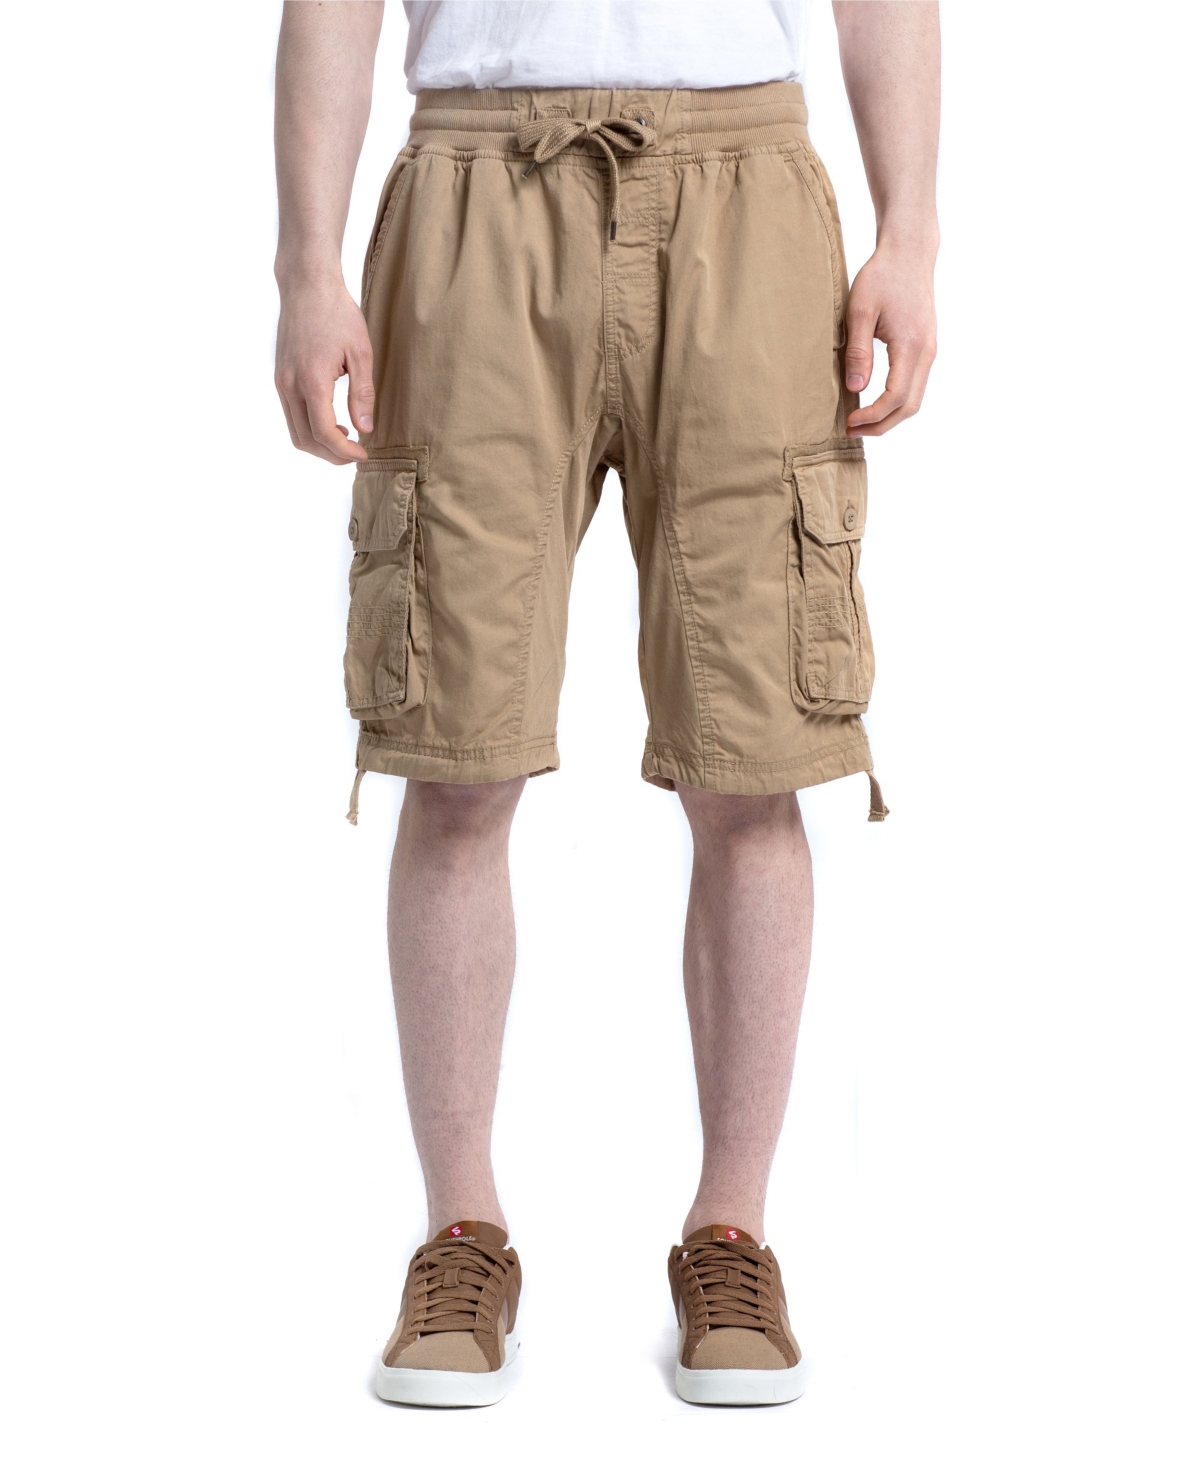 Southpole Young Mens Jogger Shorts with Cargo Pockets in Solid and Camo Colors 